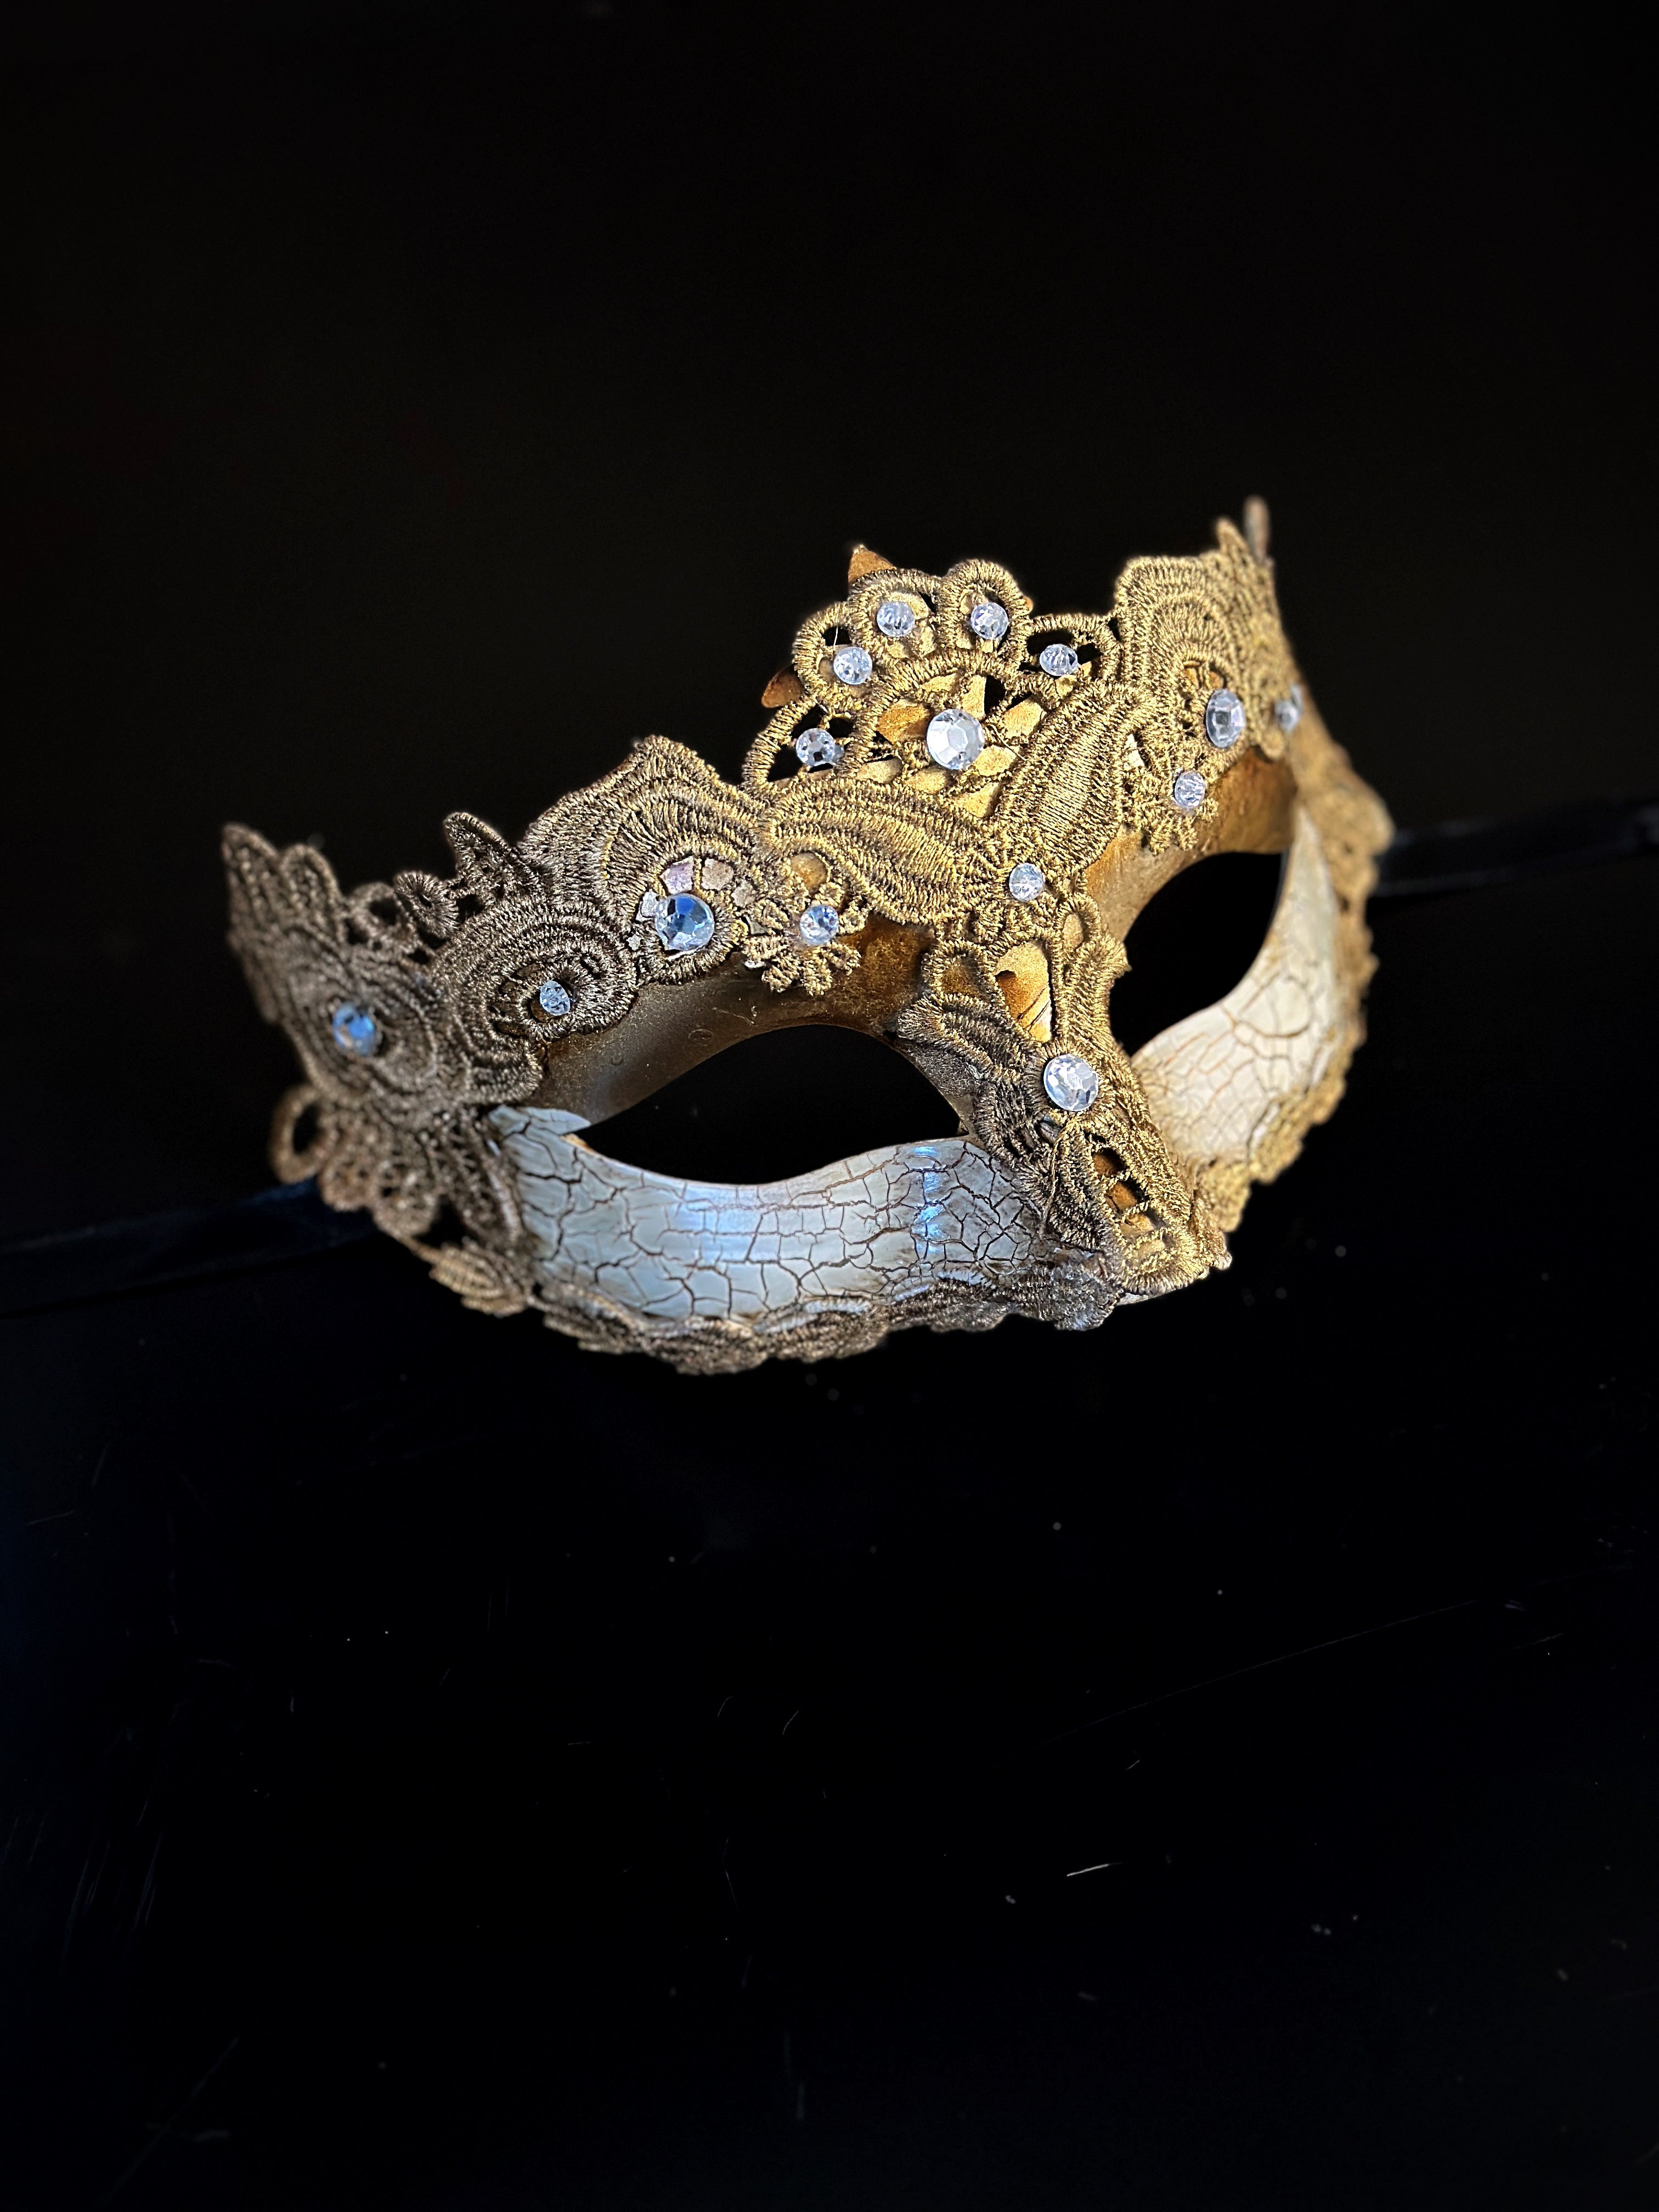 Womens masquerade mask in gold with a cracked lace brocade style.